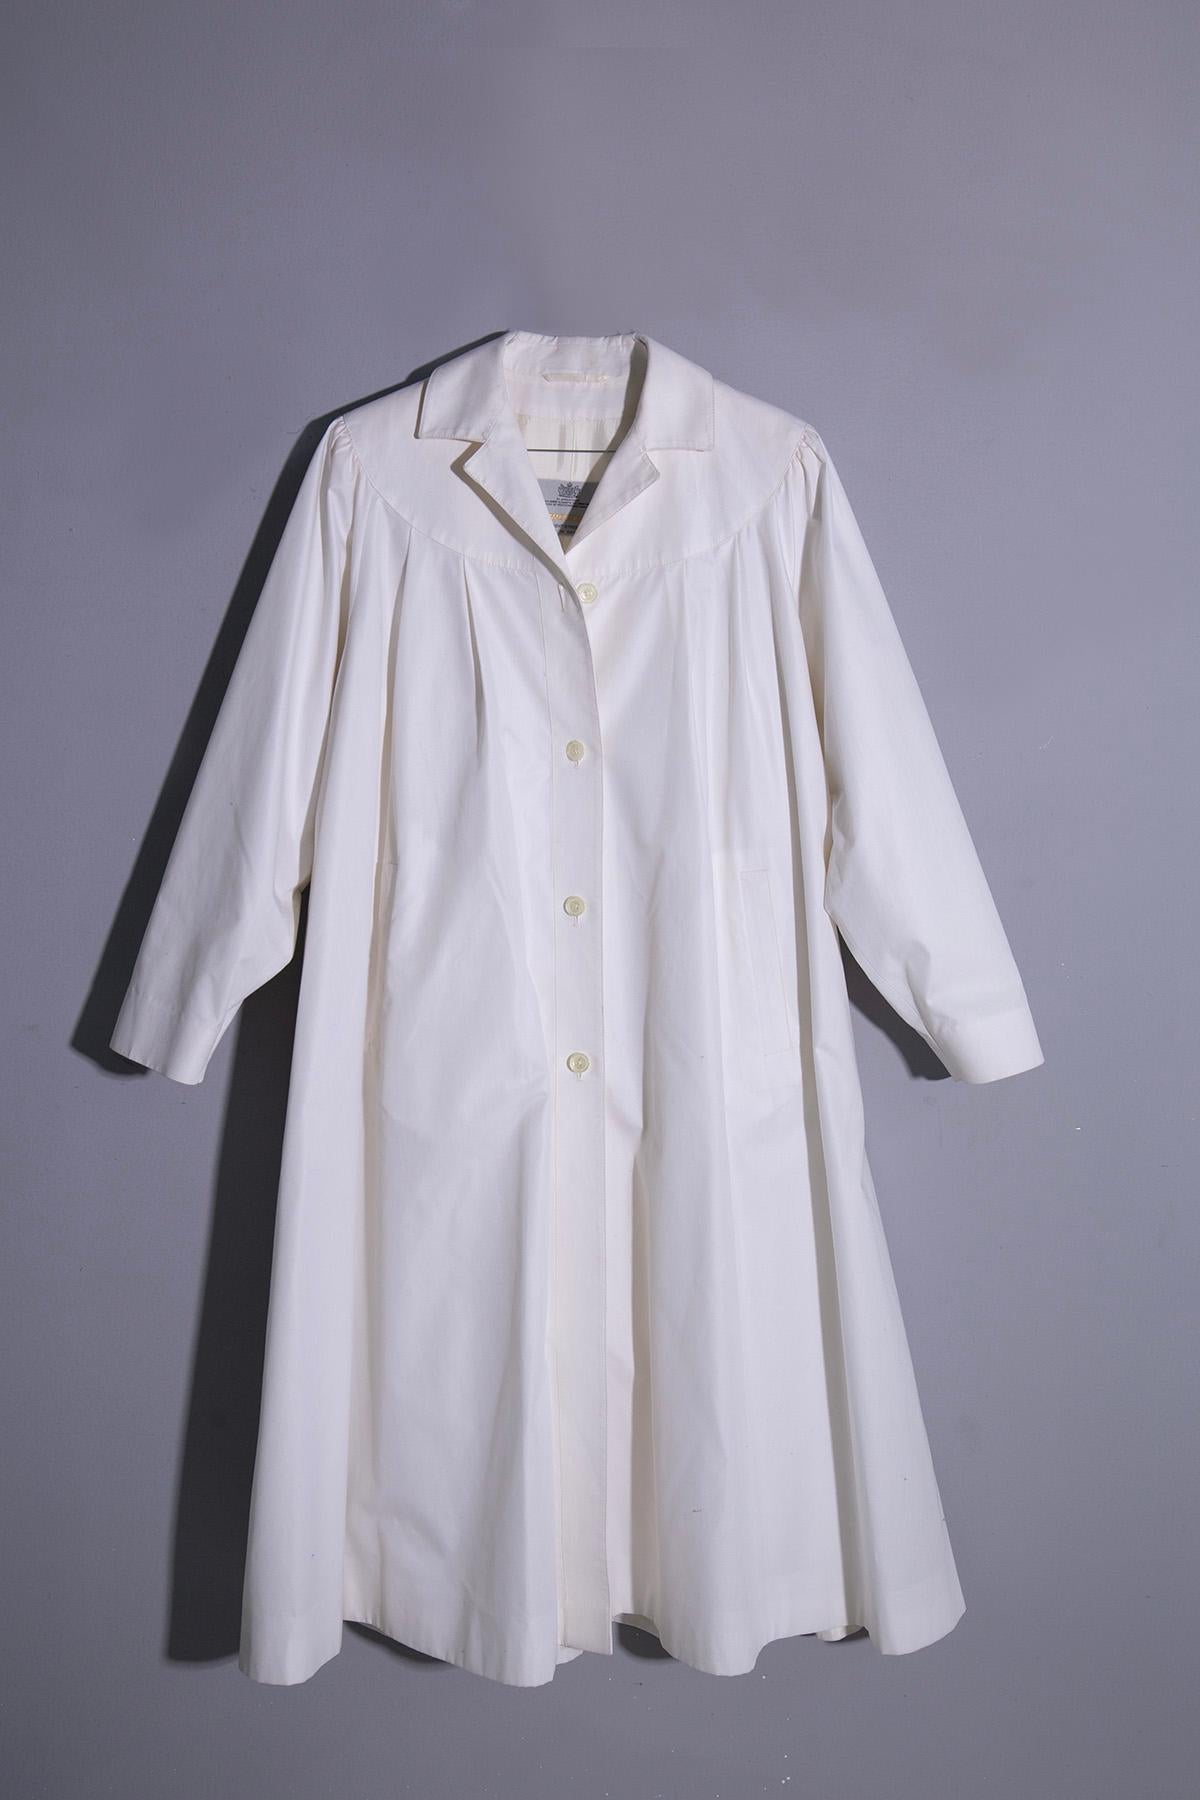 The Women's AQUASCUTUM 5 raincoat from the 1980s to early 1990s is a timeless piece that effortlessly combines style and functionality. Crafted from white acetate, this raincoat exudes sophistication and elegance while providing protection from the